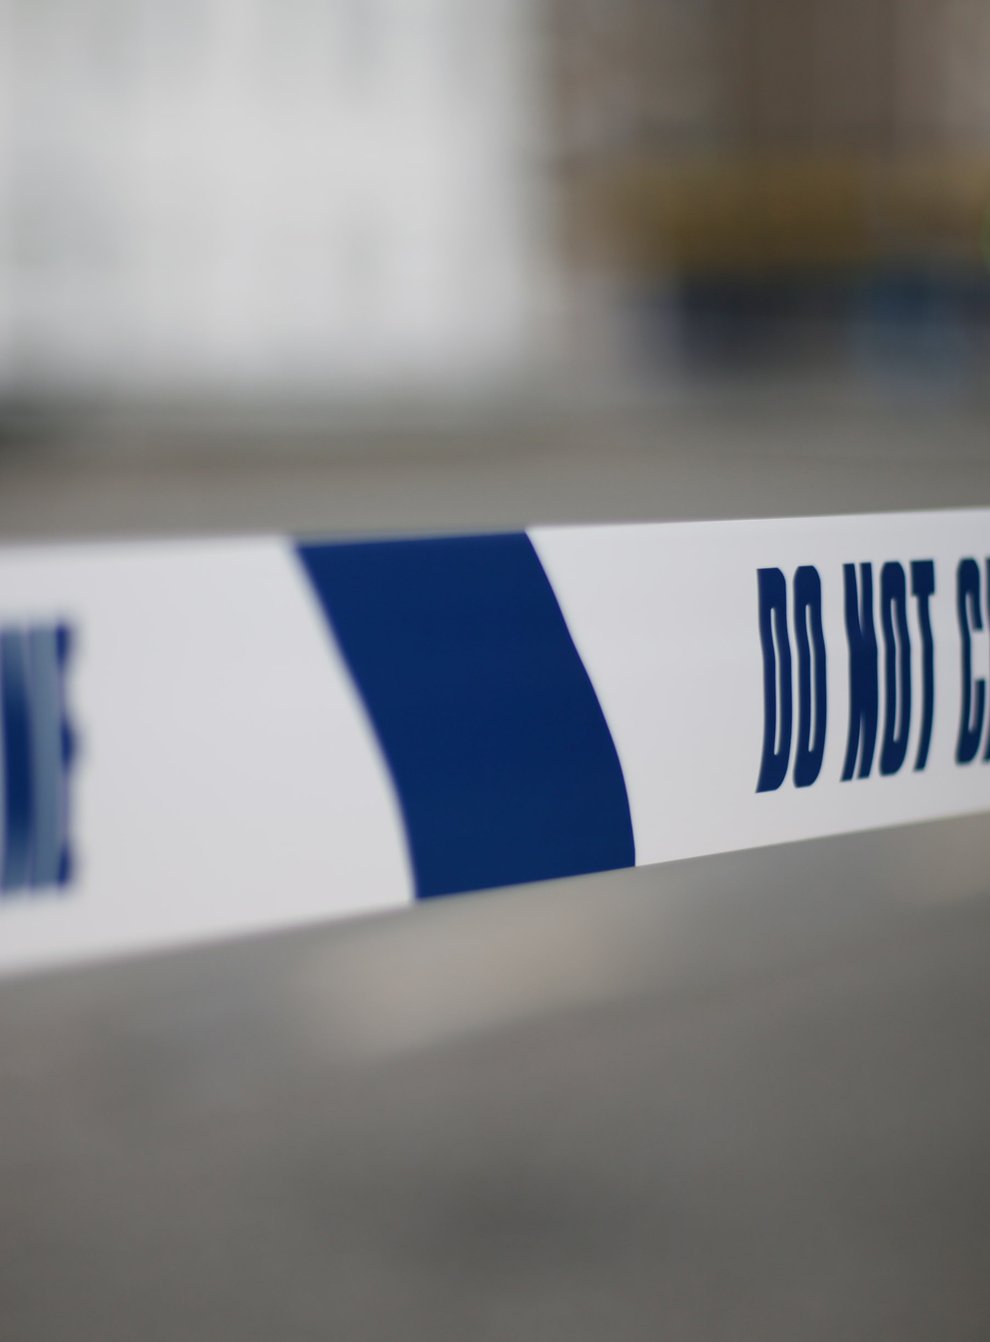 An 18-year-old man has been arrested on suspicion of murder